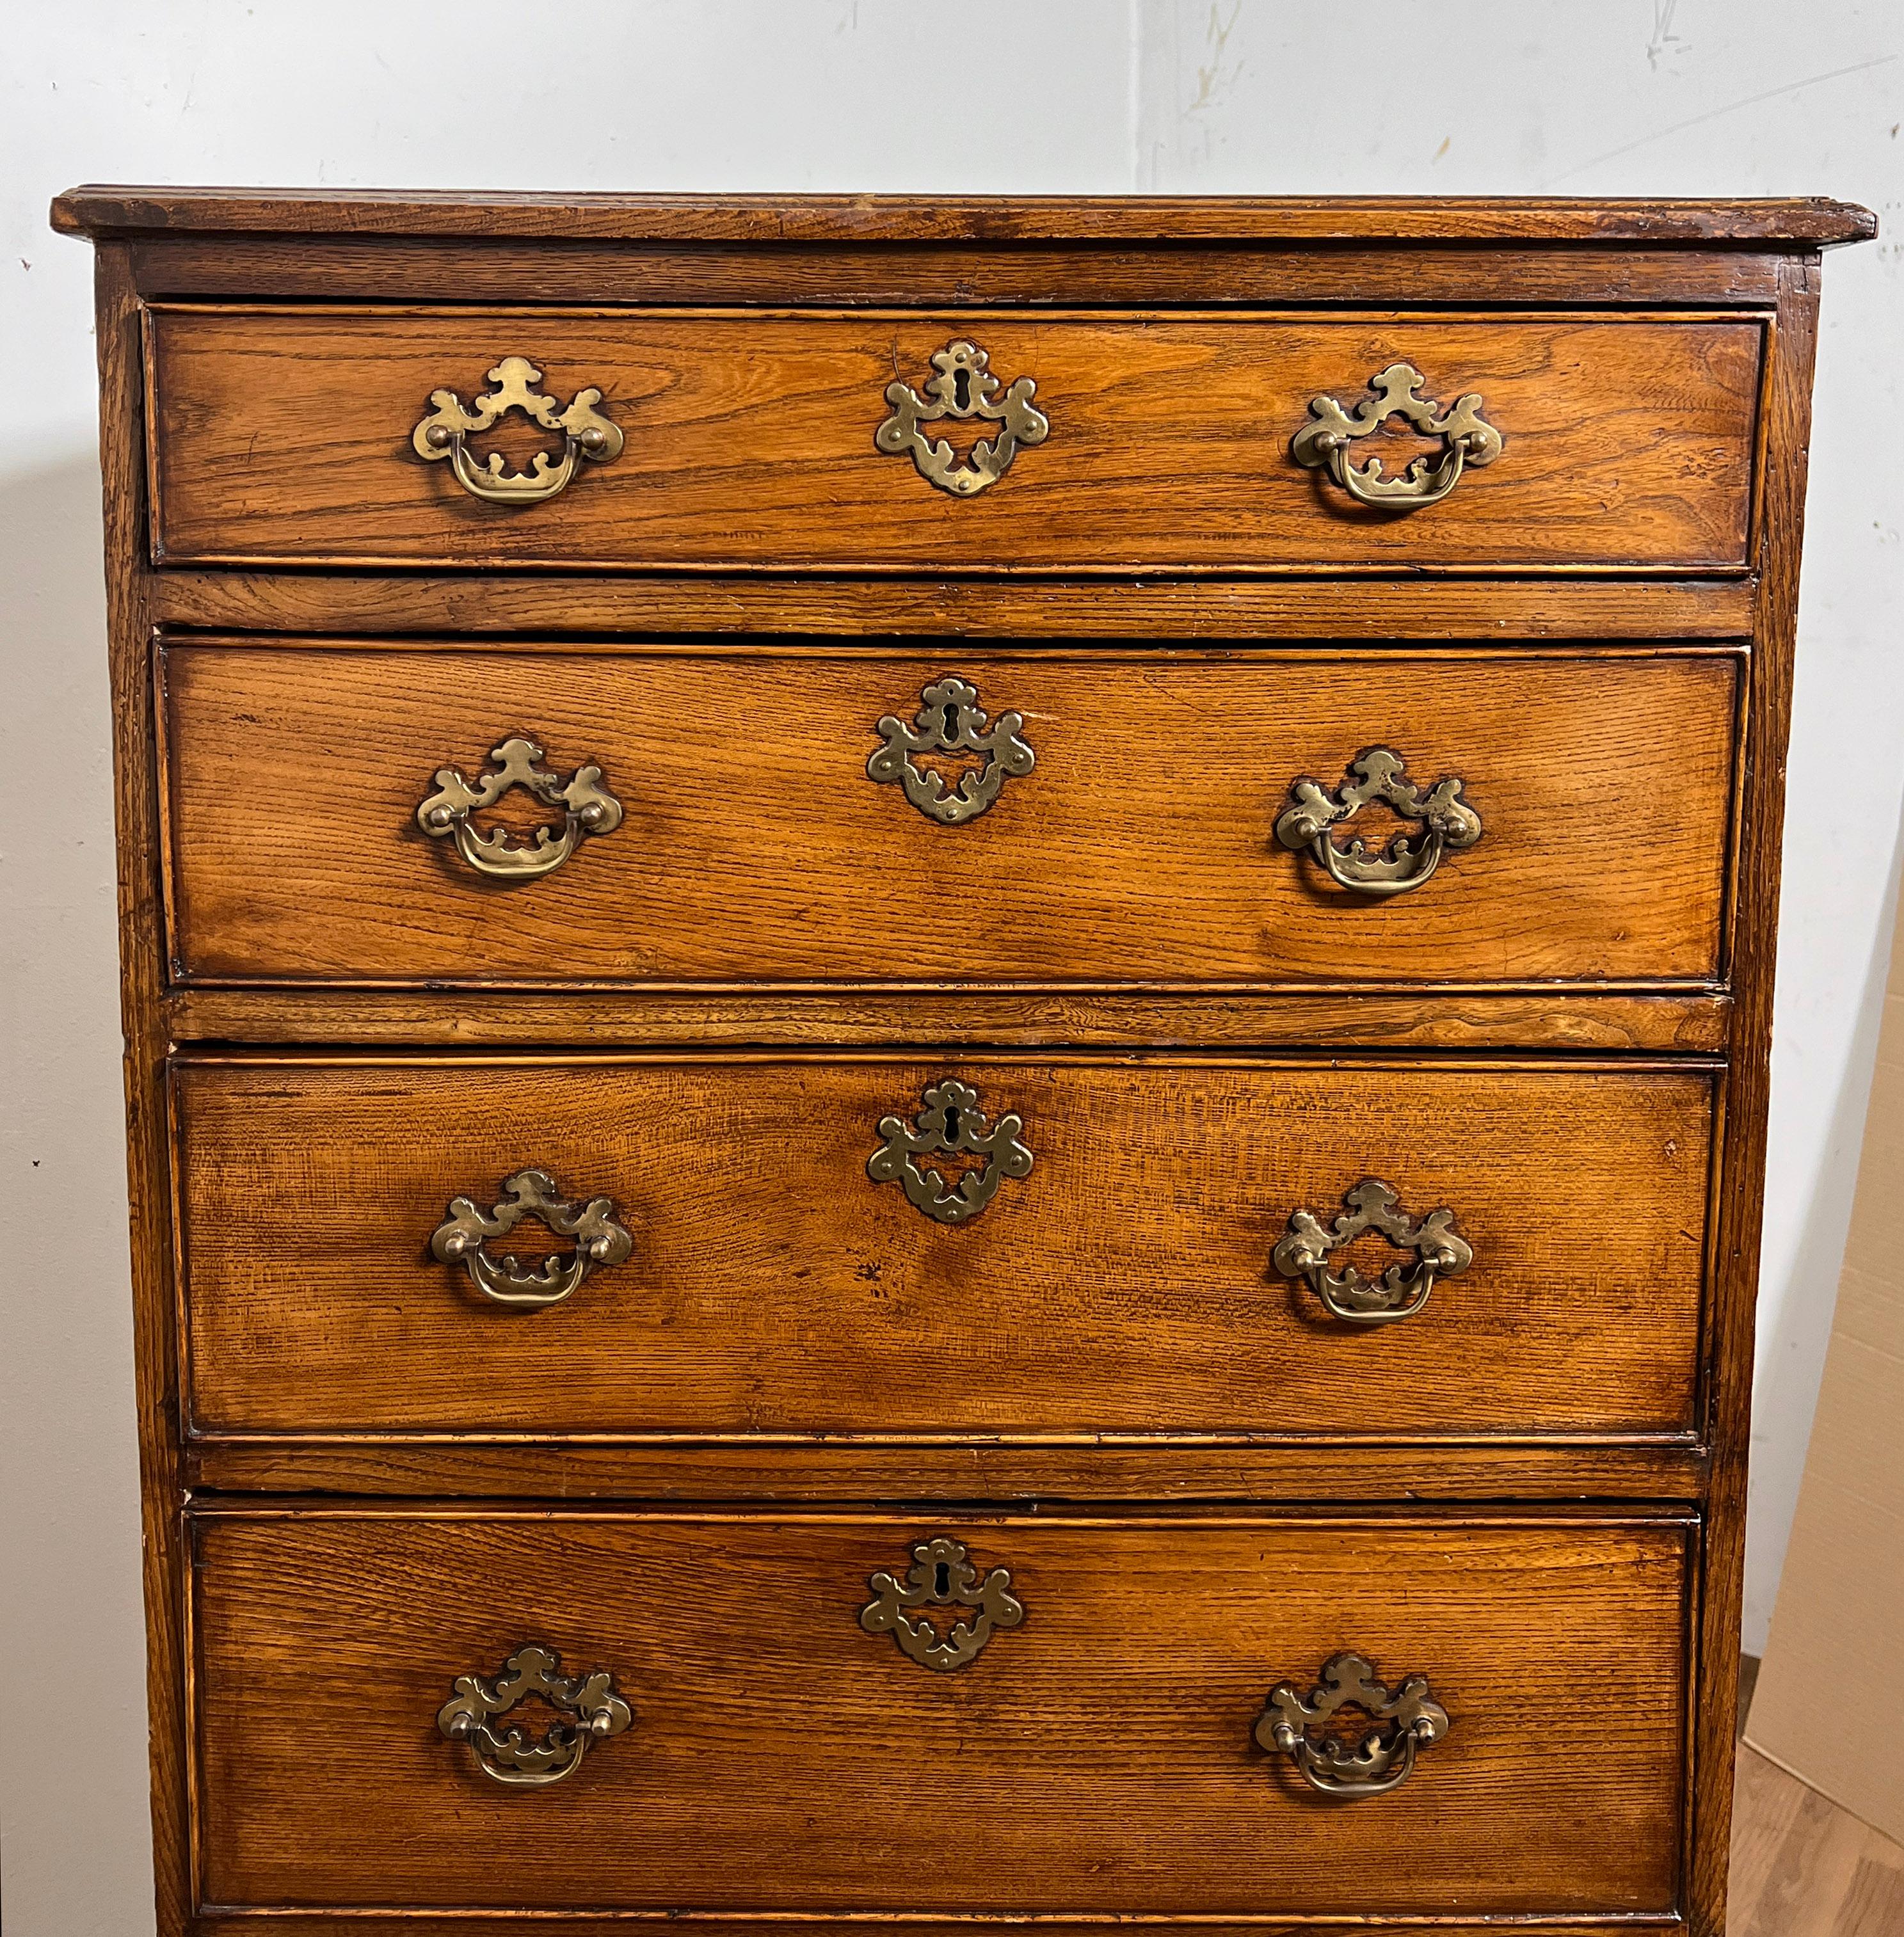  A late 1700s Georgian tall chest of six graduated drawers in oak with pierced batwing brasses and beaded drawers on high bracket feet.